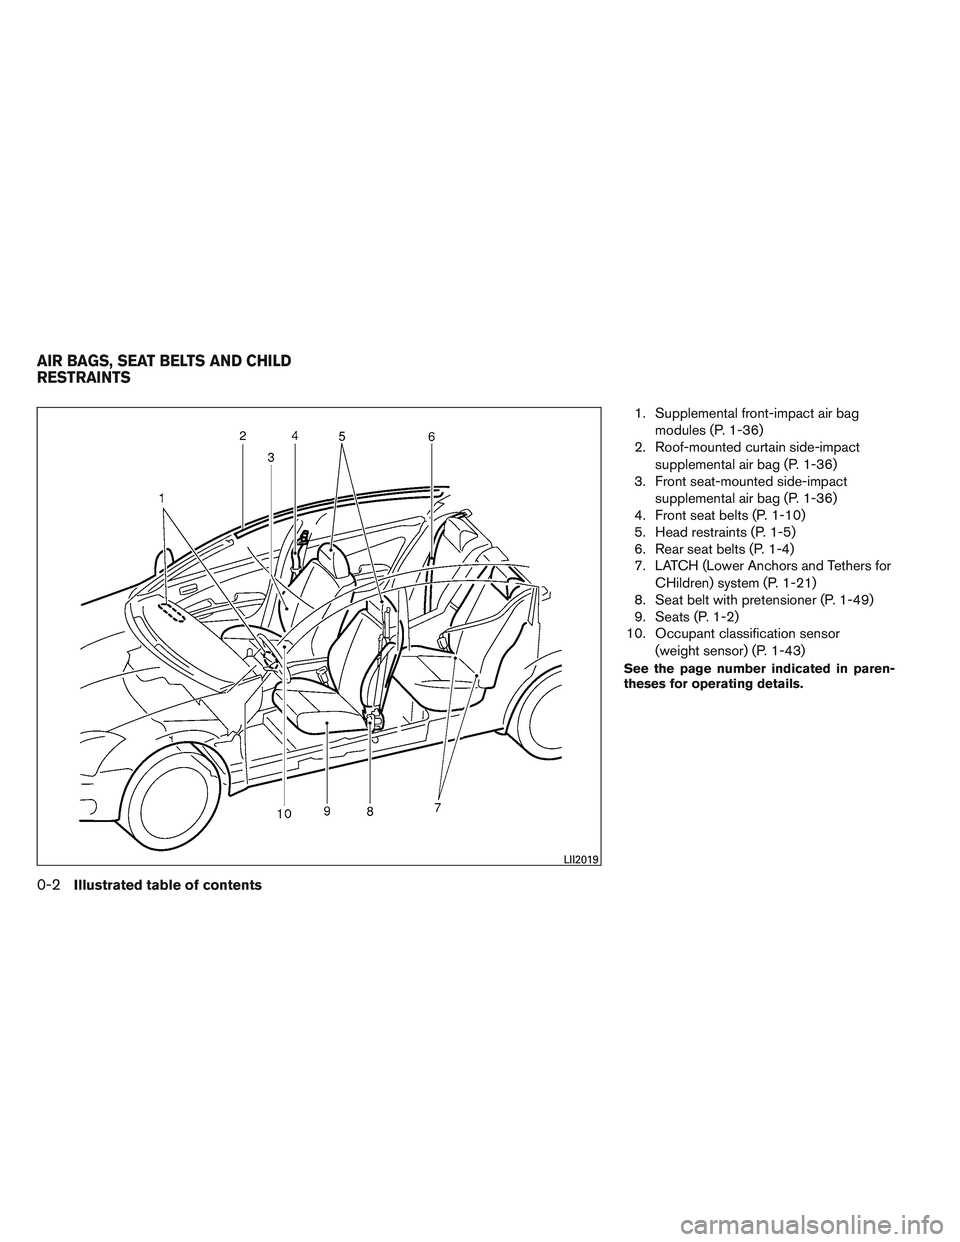 NISSAN VERSA 2013  Owners Manual 1. Supplemental front-impact air bagmodules (P. 1-36)
2. Roof-mounted curtain side-impact
supplemental air bag (P. 1-36)
3. Front seat-mounted side-impact
supplemental air bag (P. 1-36)
4. Front seat 